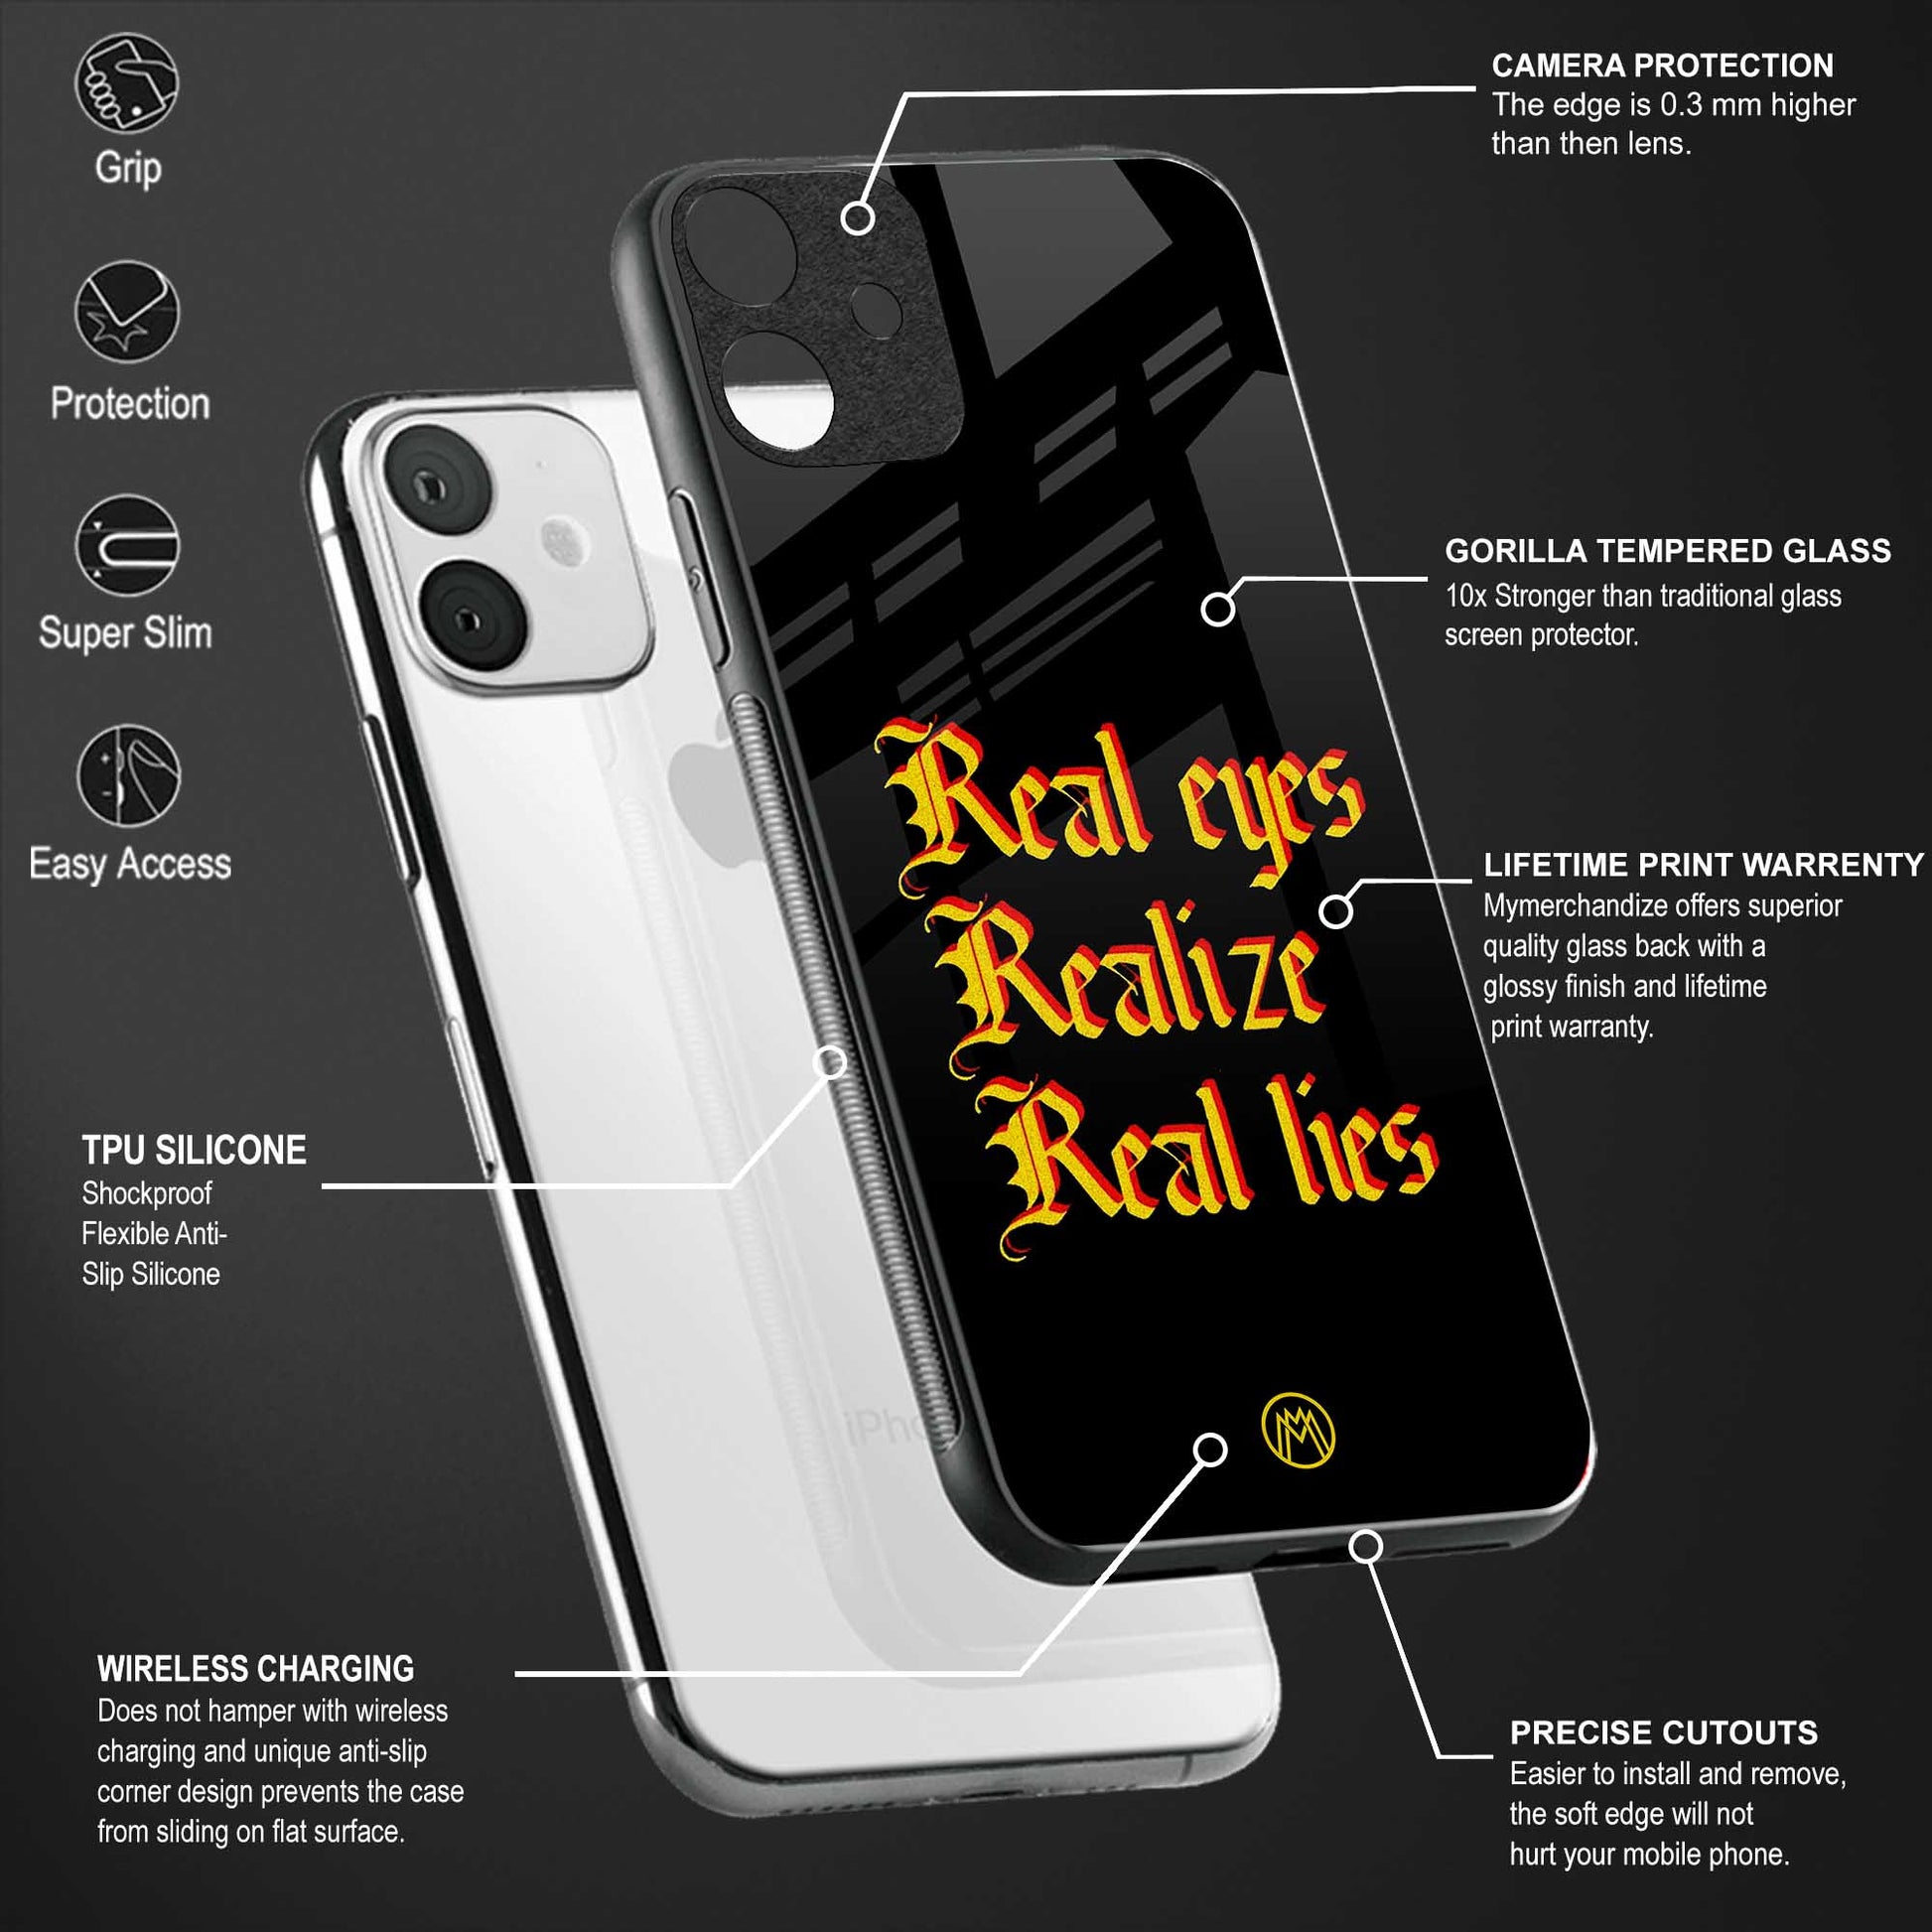 real eyes realize real lies quote back phone cover | glass case for samsung galaxy a33 5g